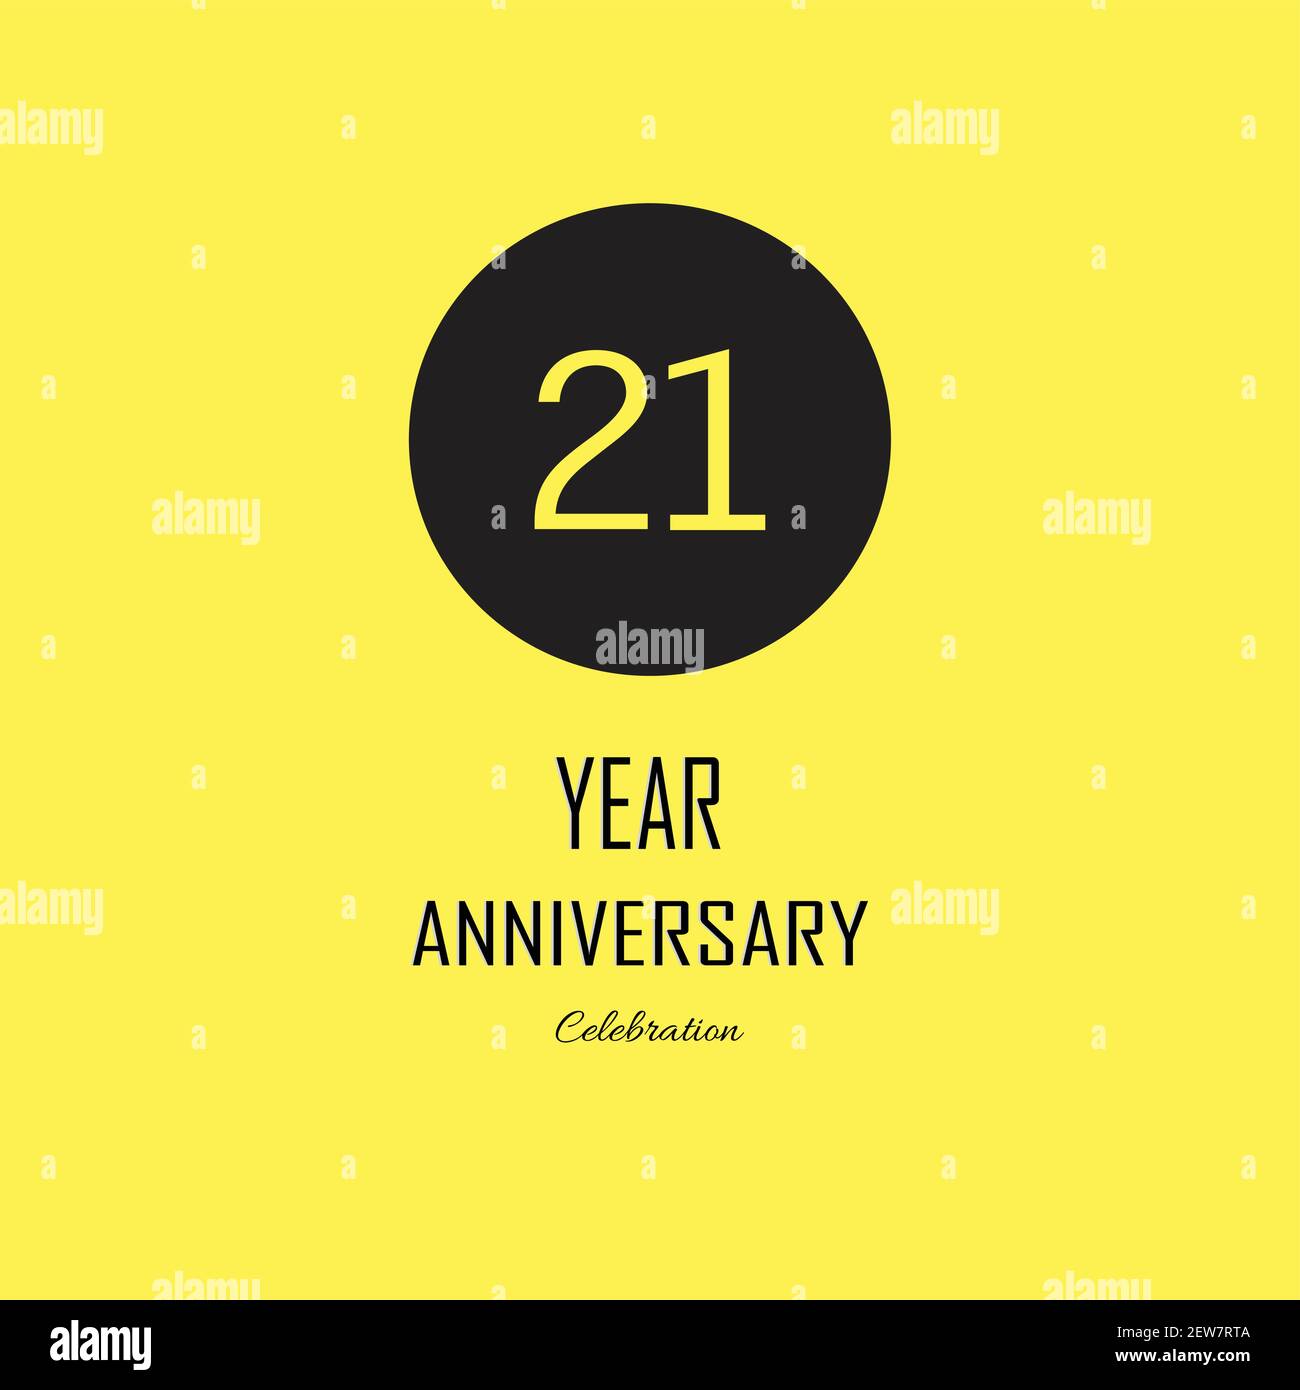 21 Anniversary celebration on yellow background. Vector festive illustration. Birthday or wedding party event decoration Stock Vector